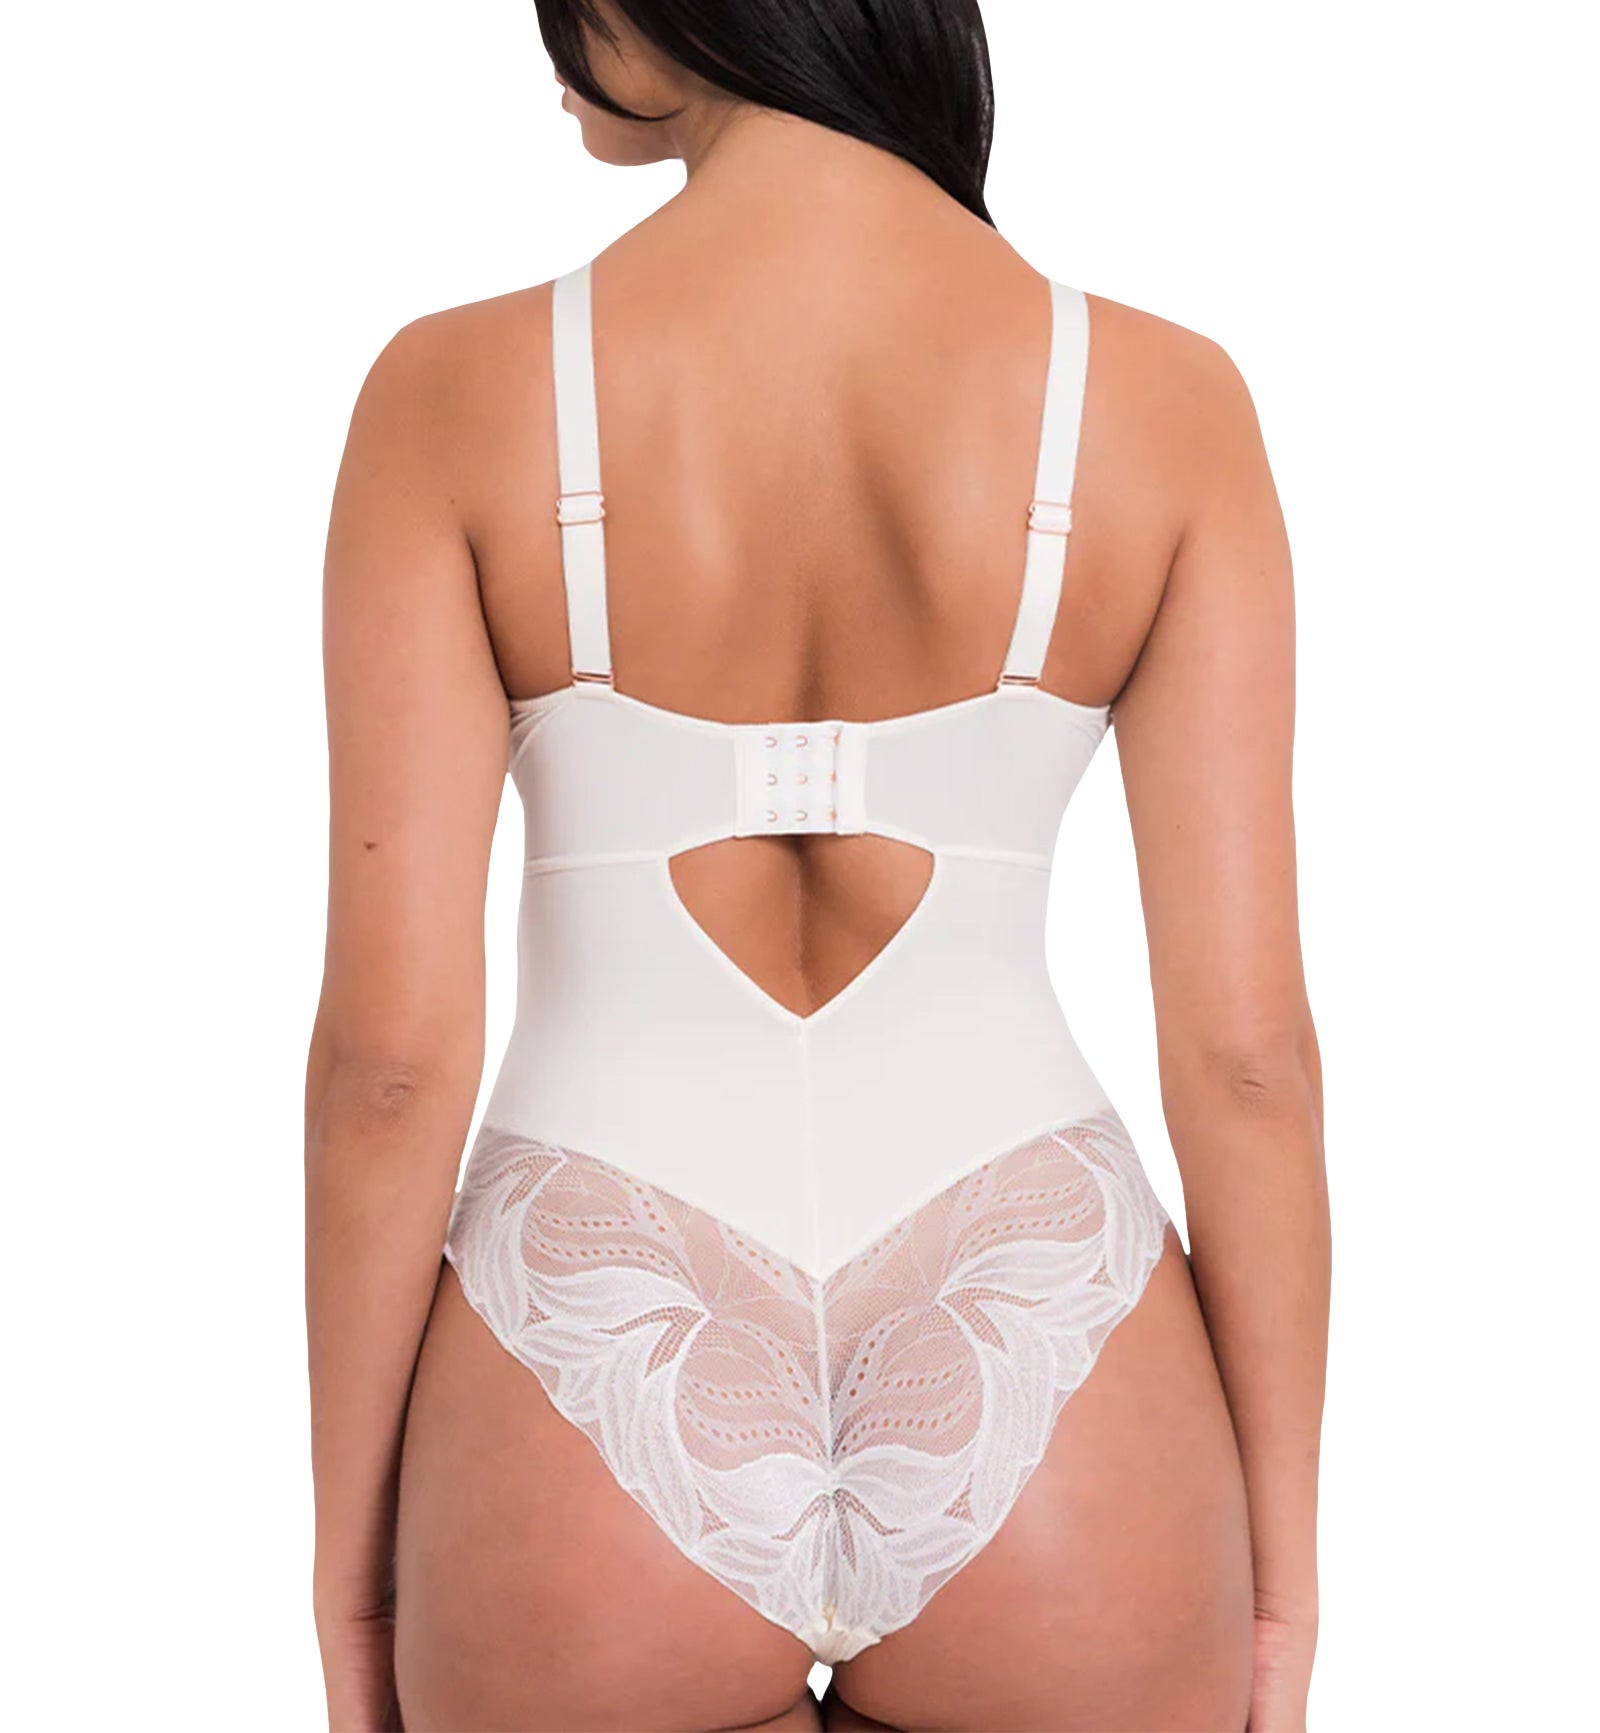 Scantilly by Curvy Kate Indulgence Stretch Lace Body Suit (ST010704),S,Ivory - Ivory,Small